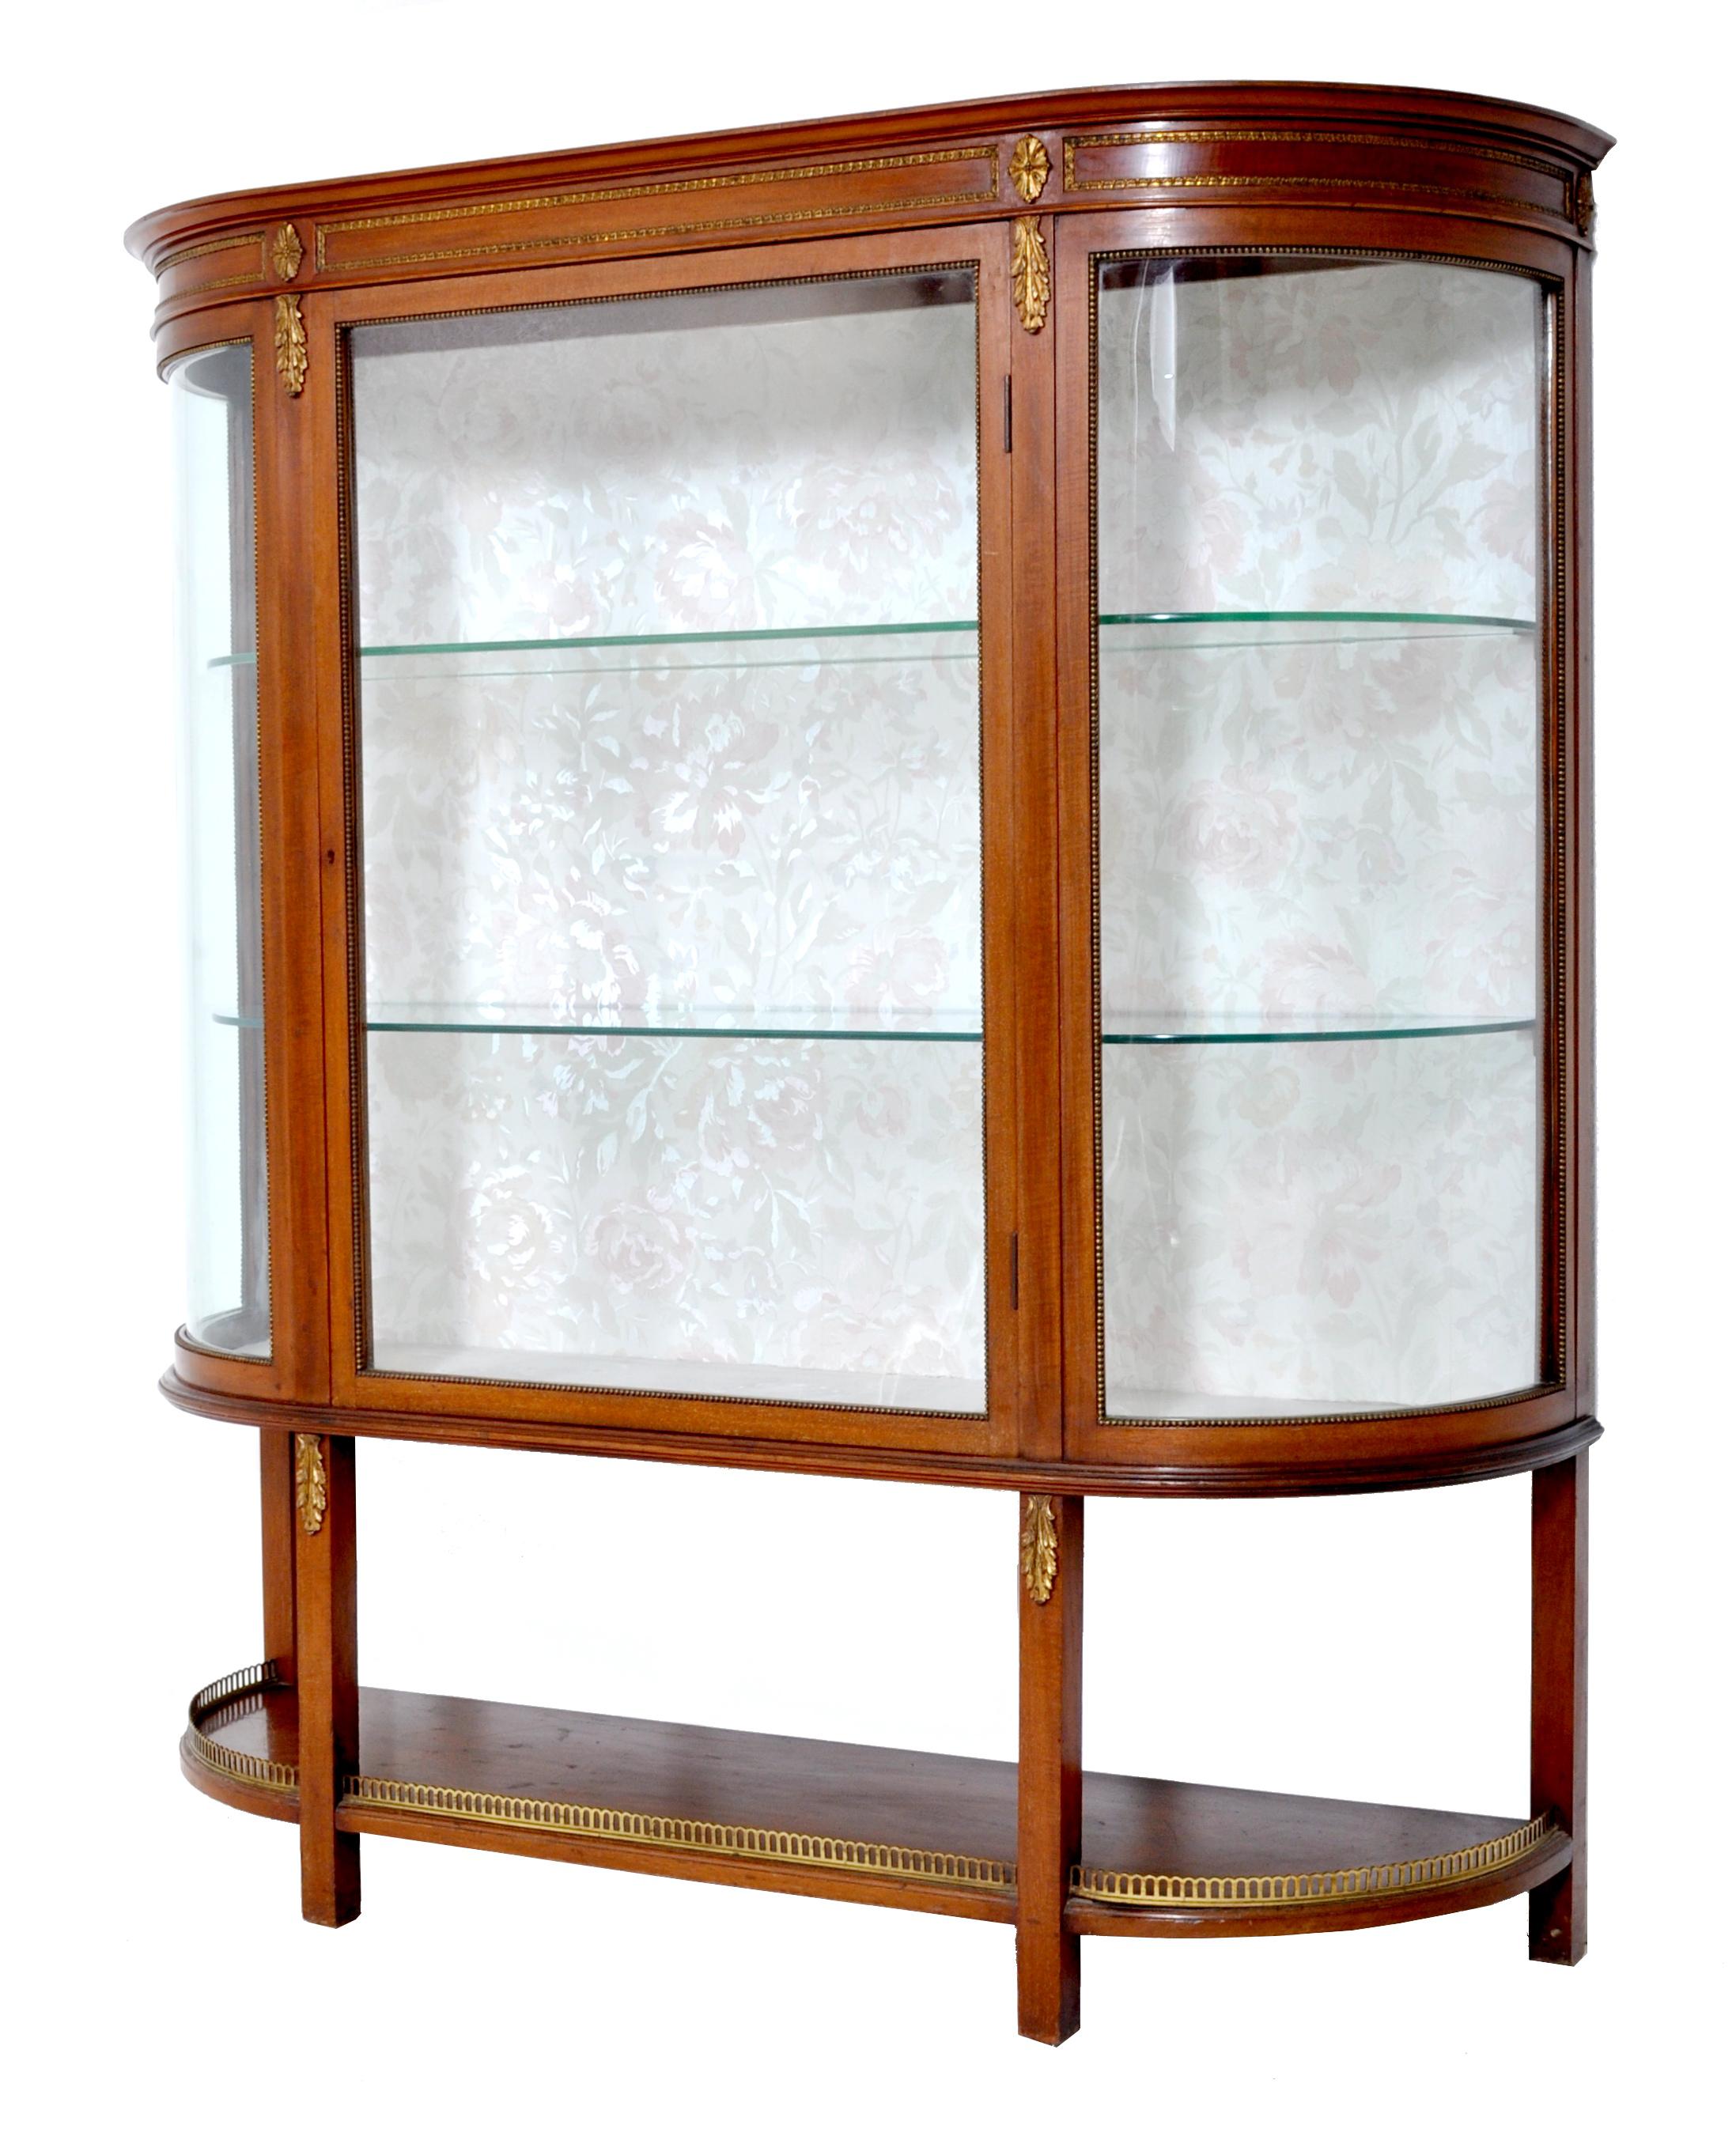 Antique Louis XVI style English mahogany curved China display cabinet, circa 1890. The cabinet having gilded bronze mounts and oval gilded bronze paterae to the top, below having corresponding gilded bronze acanthus leaves. The cabinet having a